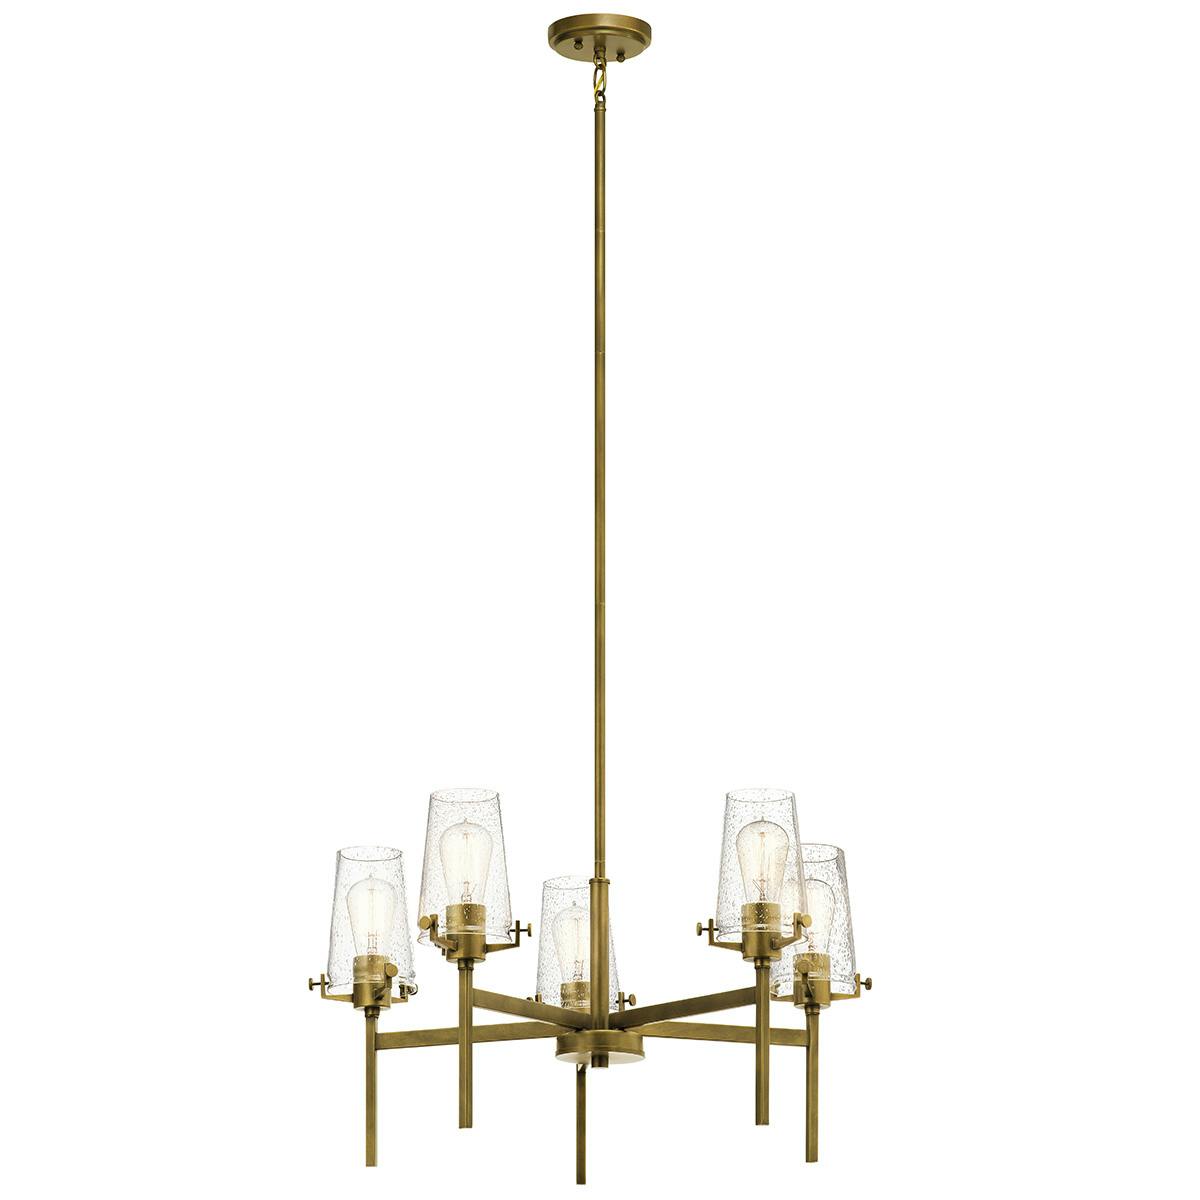 Alton 27" Chandelier Natural Brass on a white background